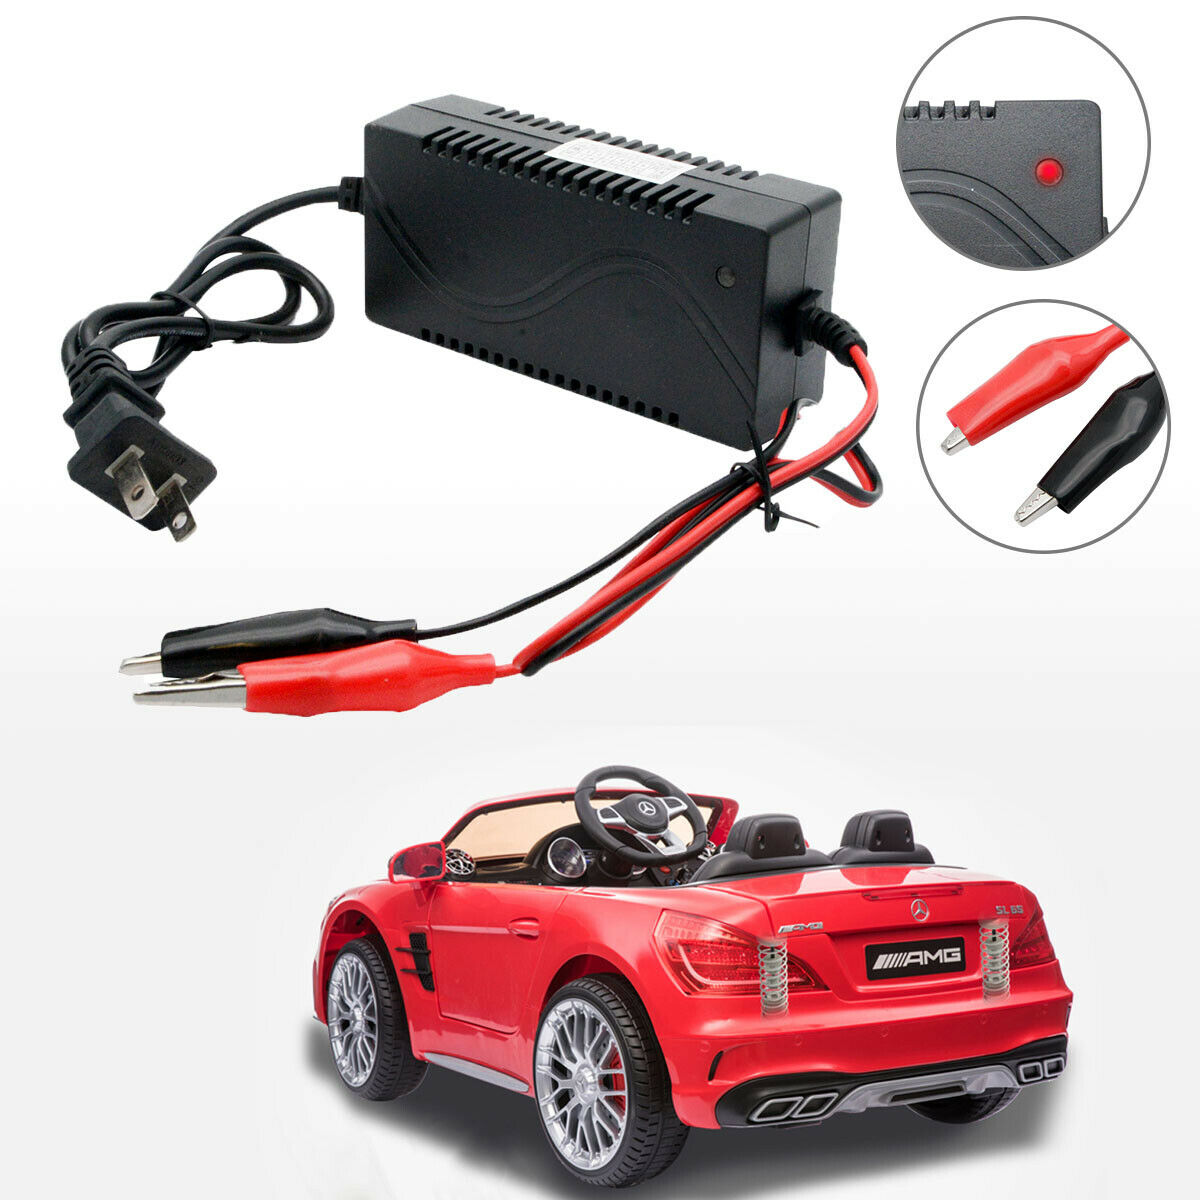 Portable 12V 1A Smart Lead Acid Battery Charger For Toy Car Motorbike Quad Bike Item specifics Condition: New Brand: